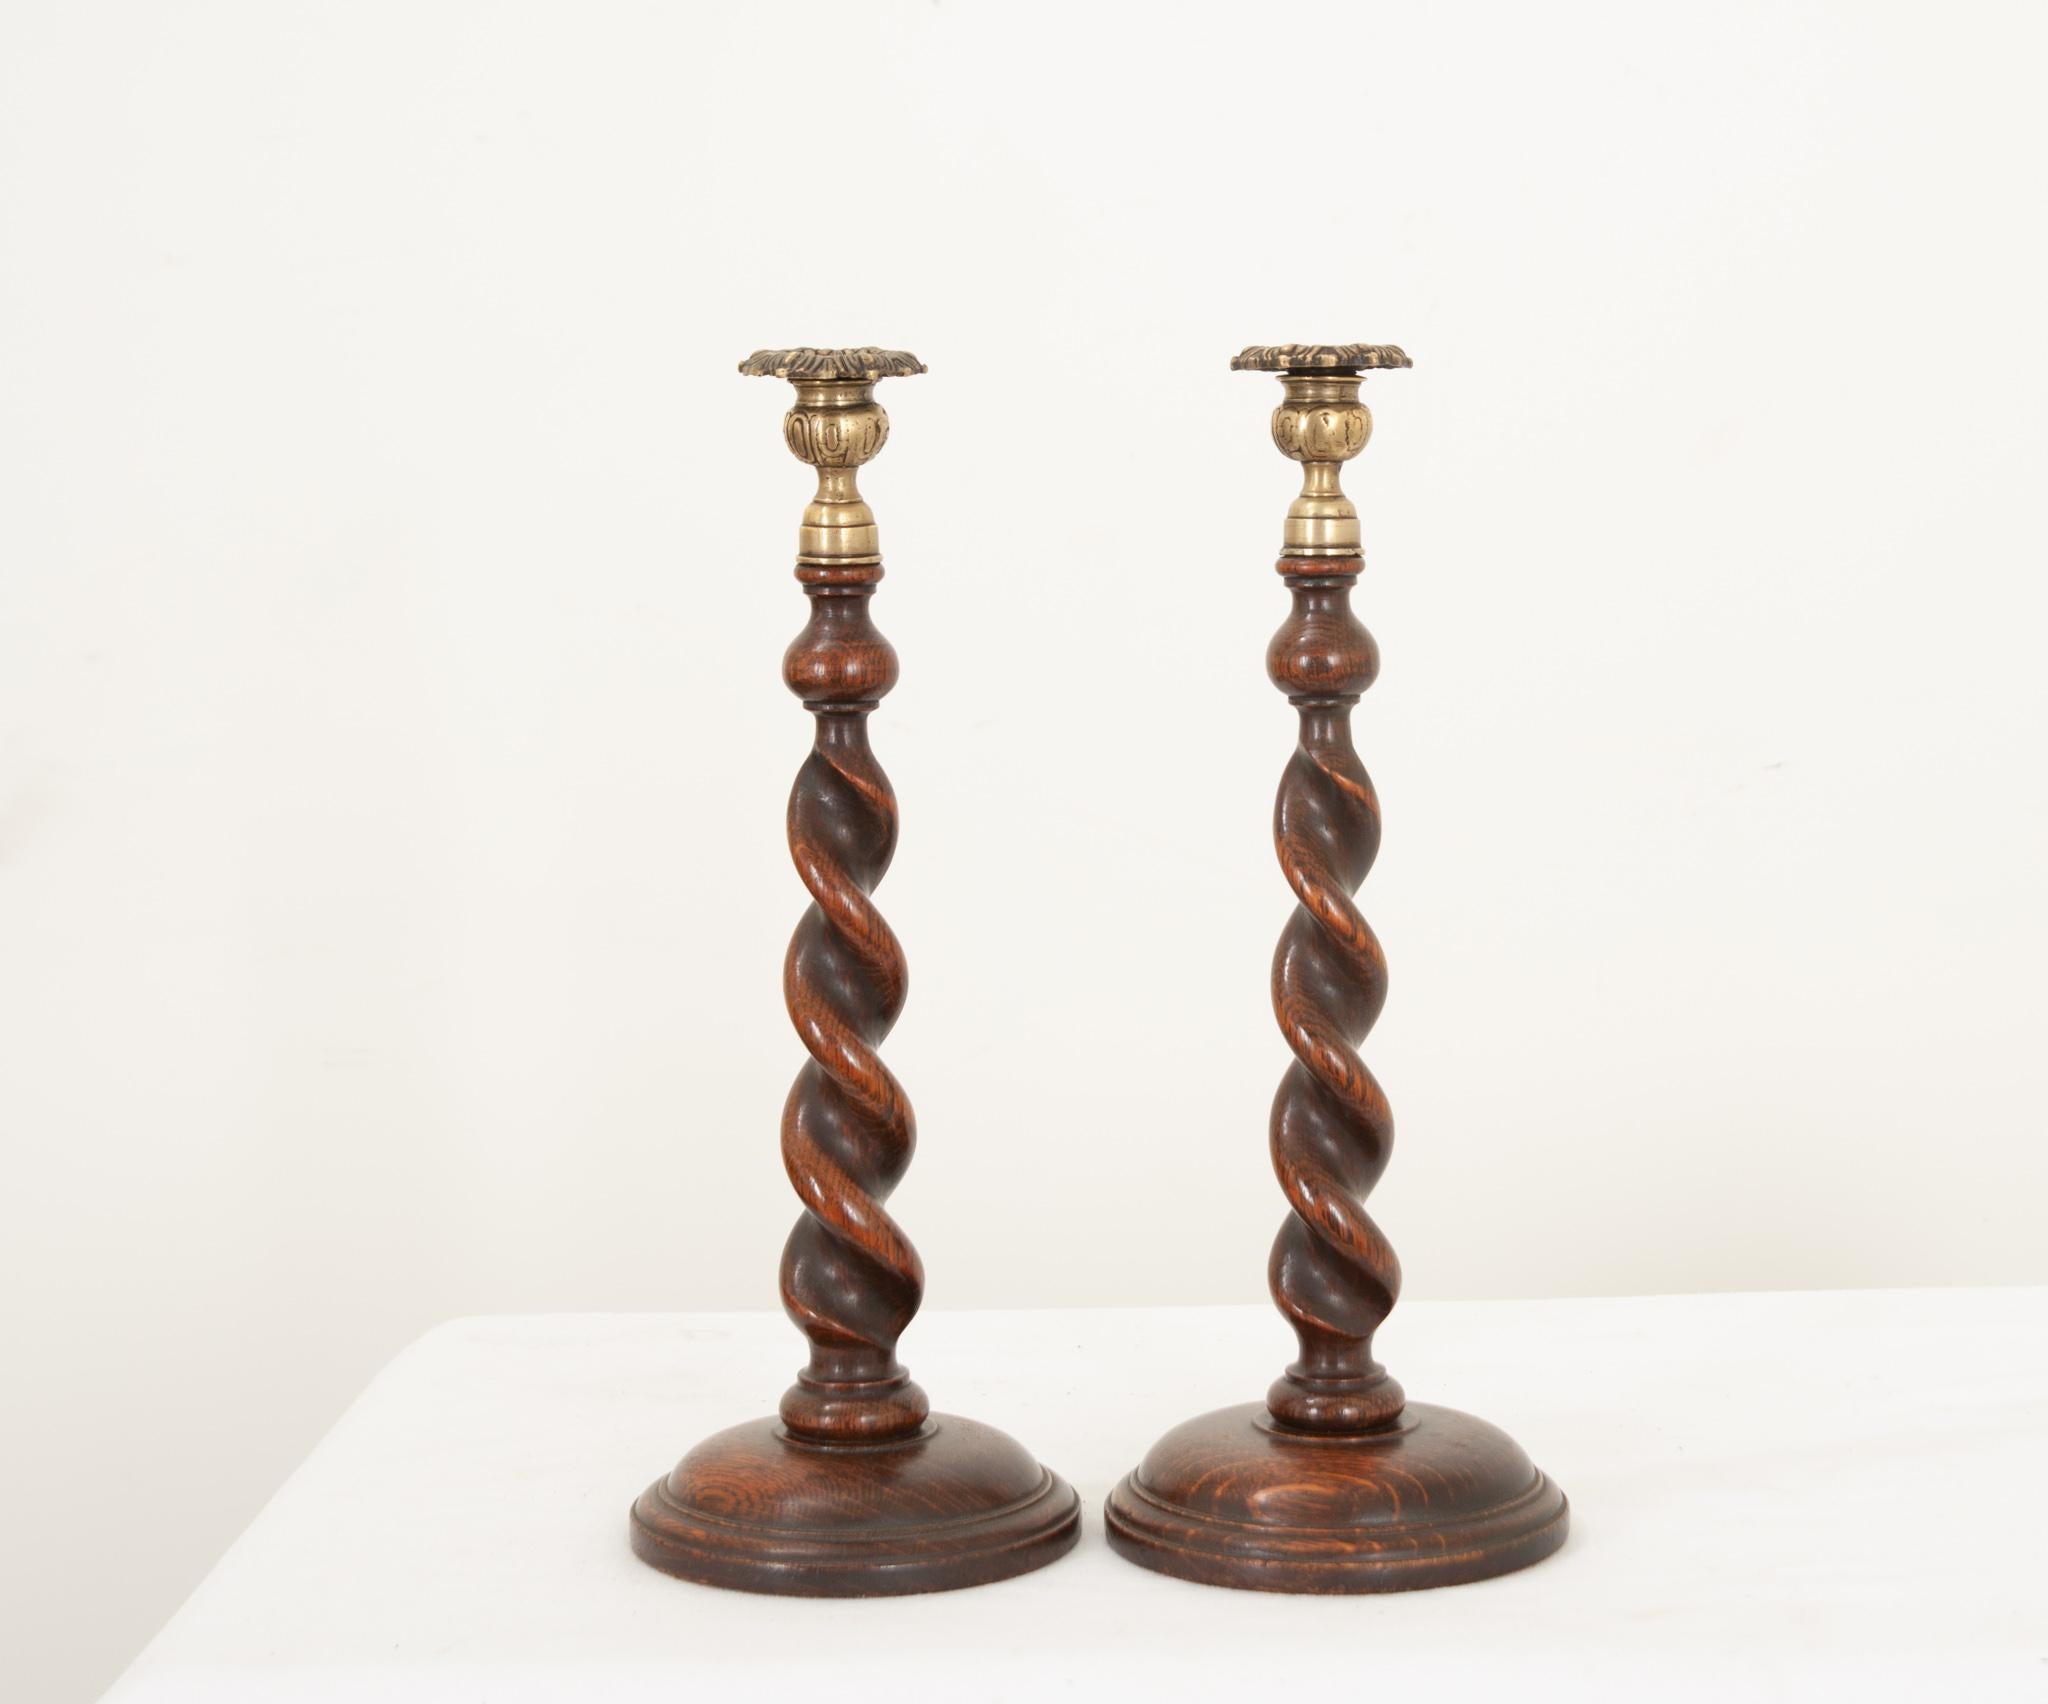 A lovely pair of oak barley twist candlestick holders from England, hand crafted during the 1880’s. The richly toned hardwood has a fantastic patina and compliments the stamped brass bobeche perfectly. A worn felt bottom prevents them from sliding